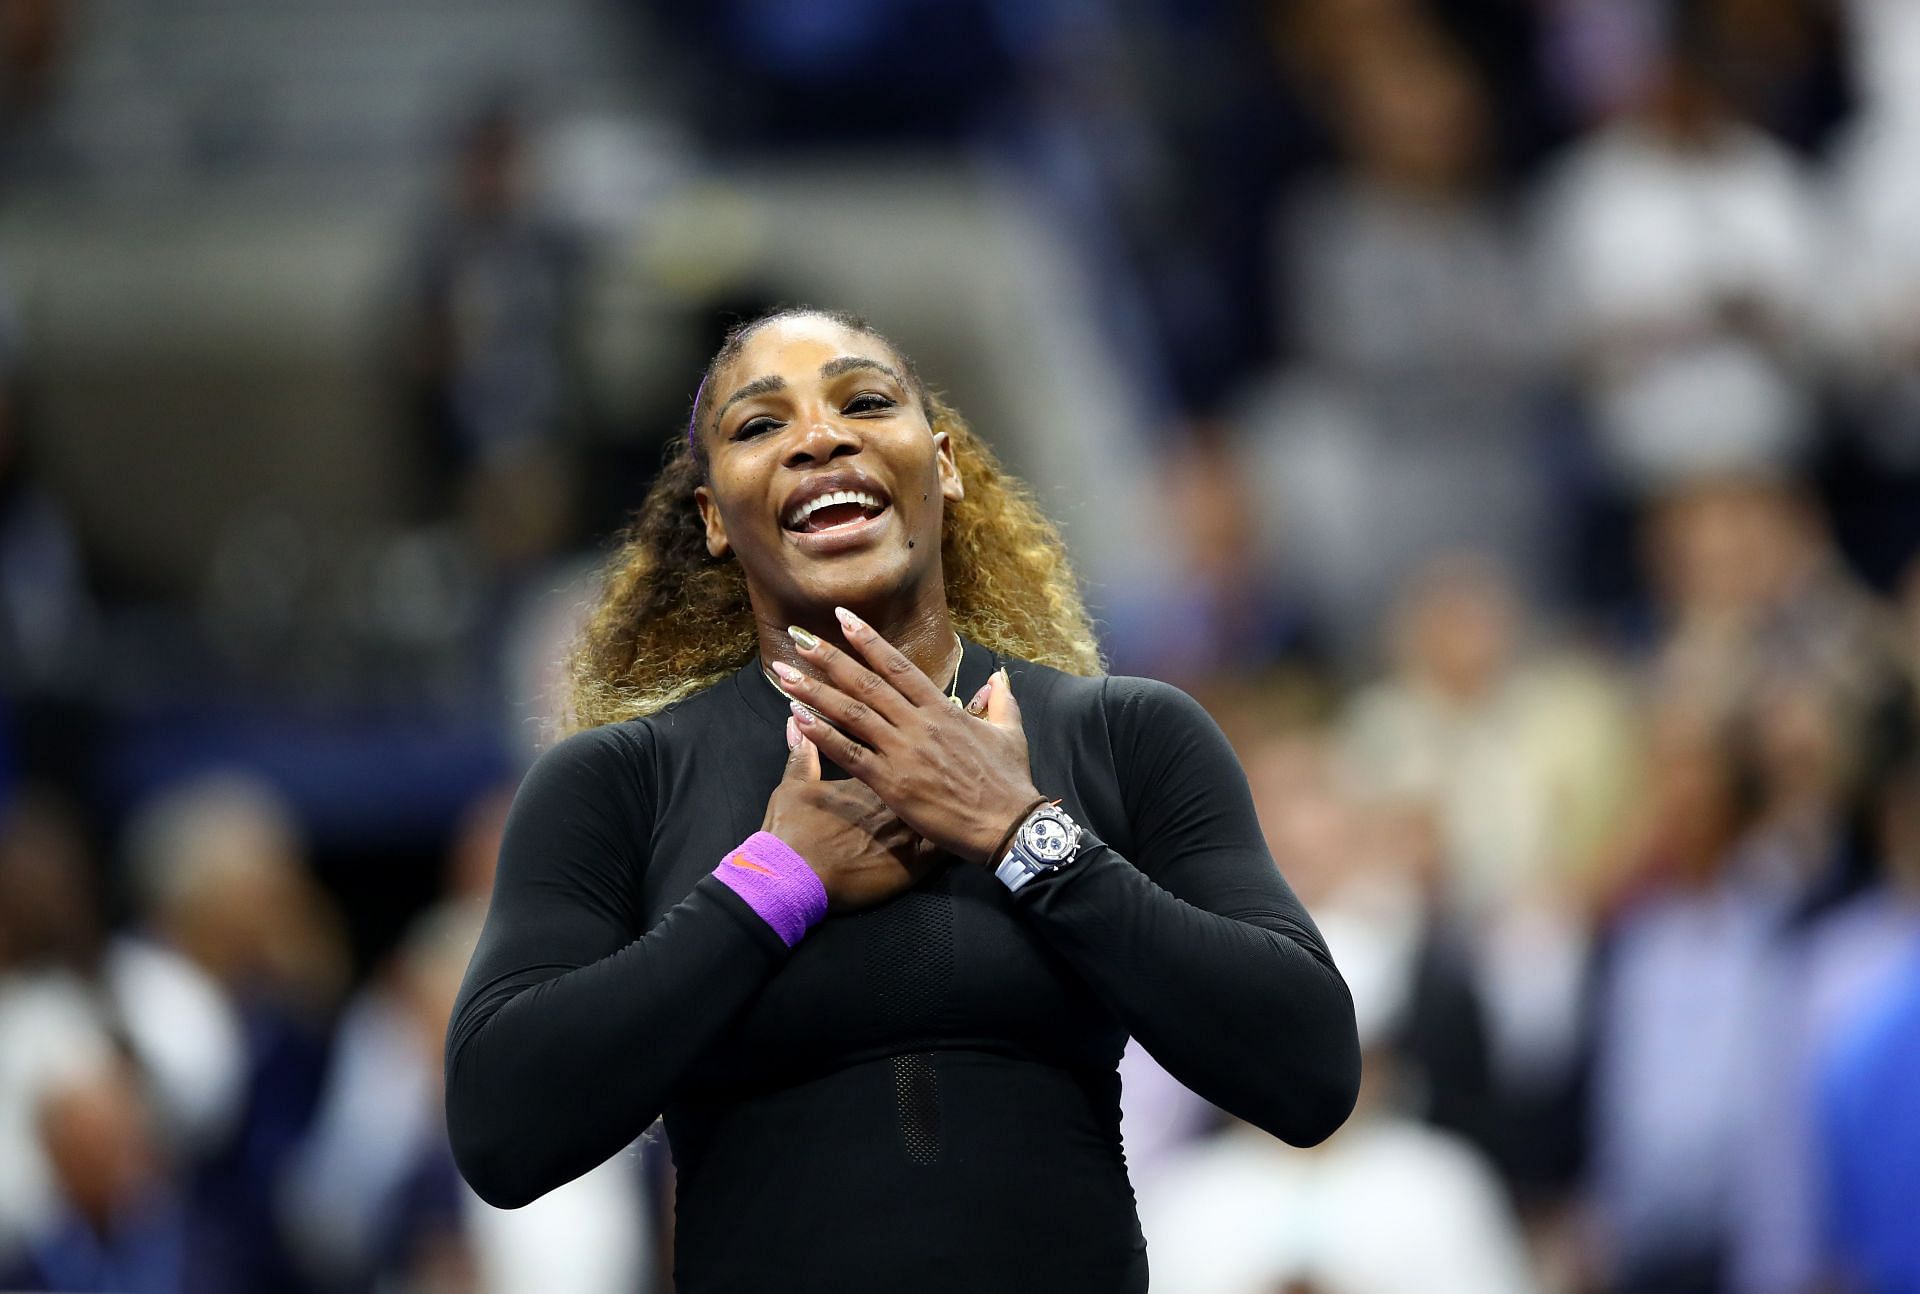 Serena Williams jokes about potential names for her second child